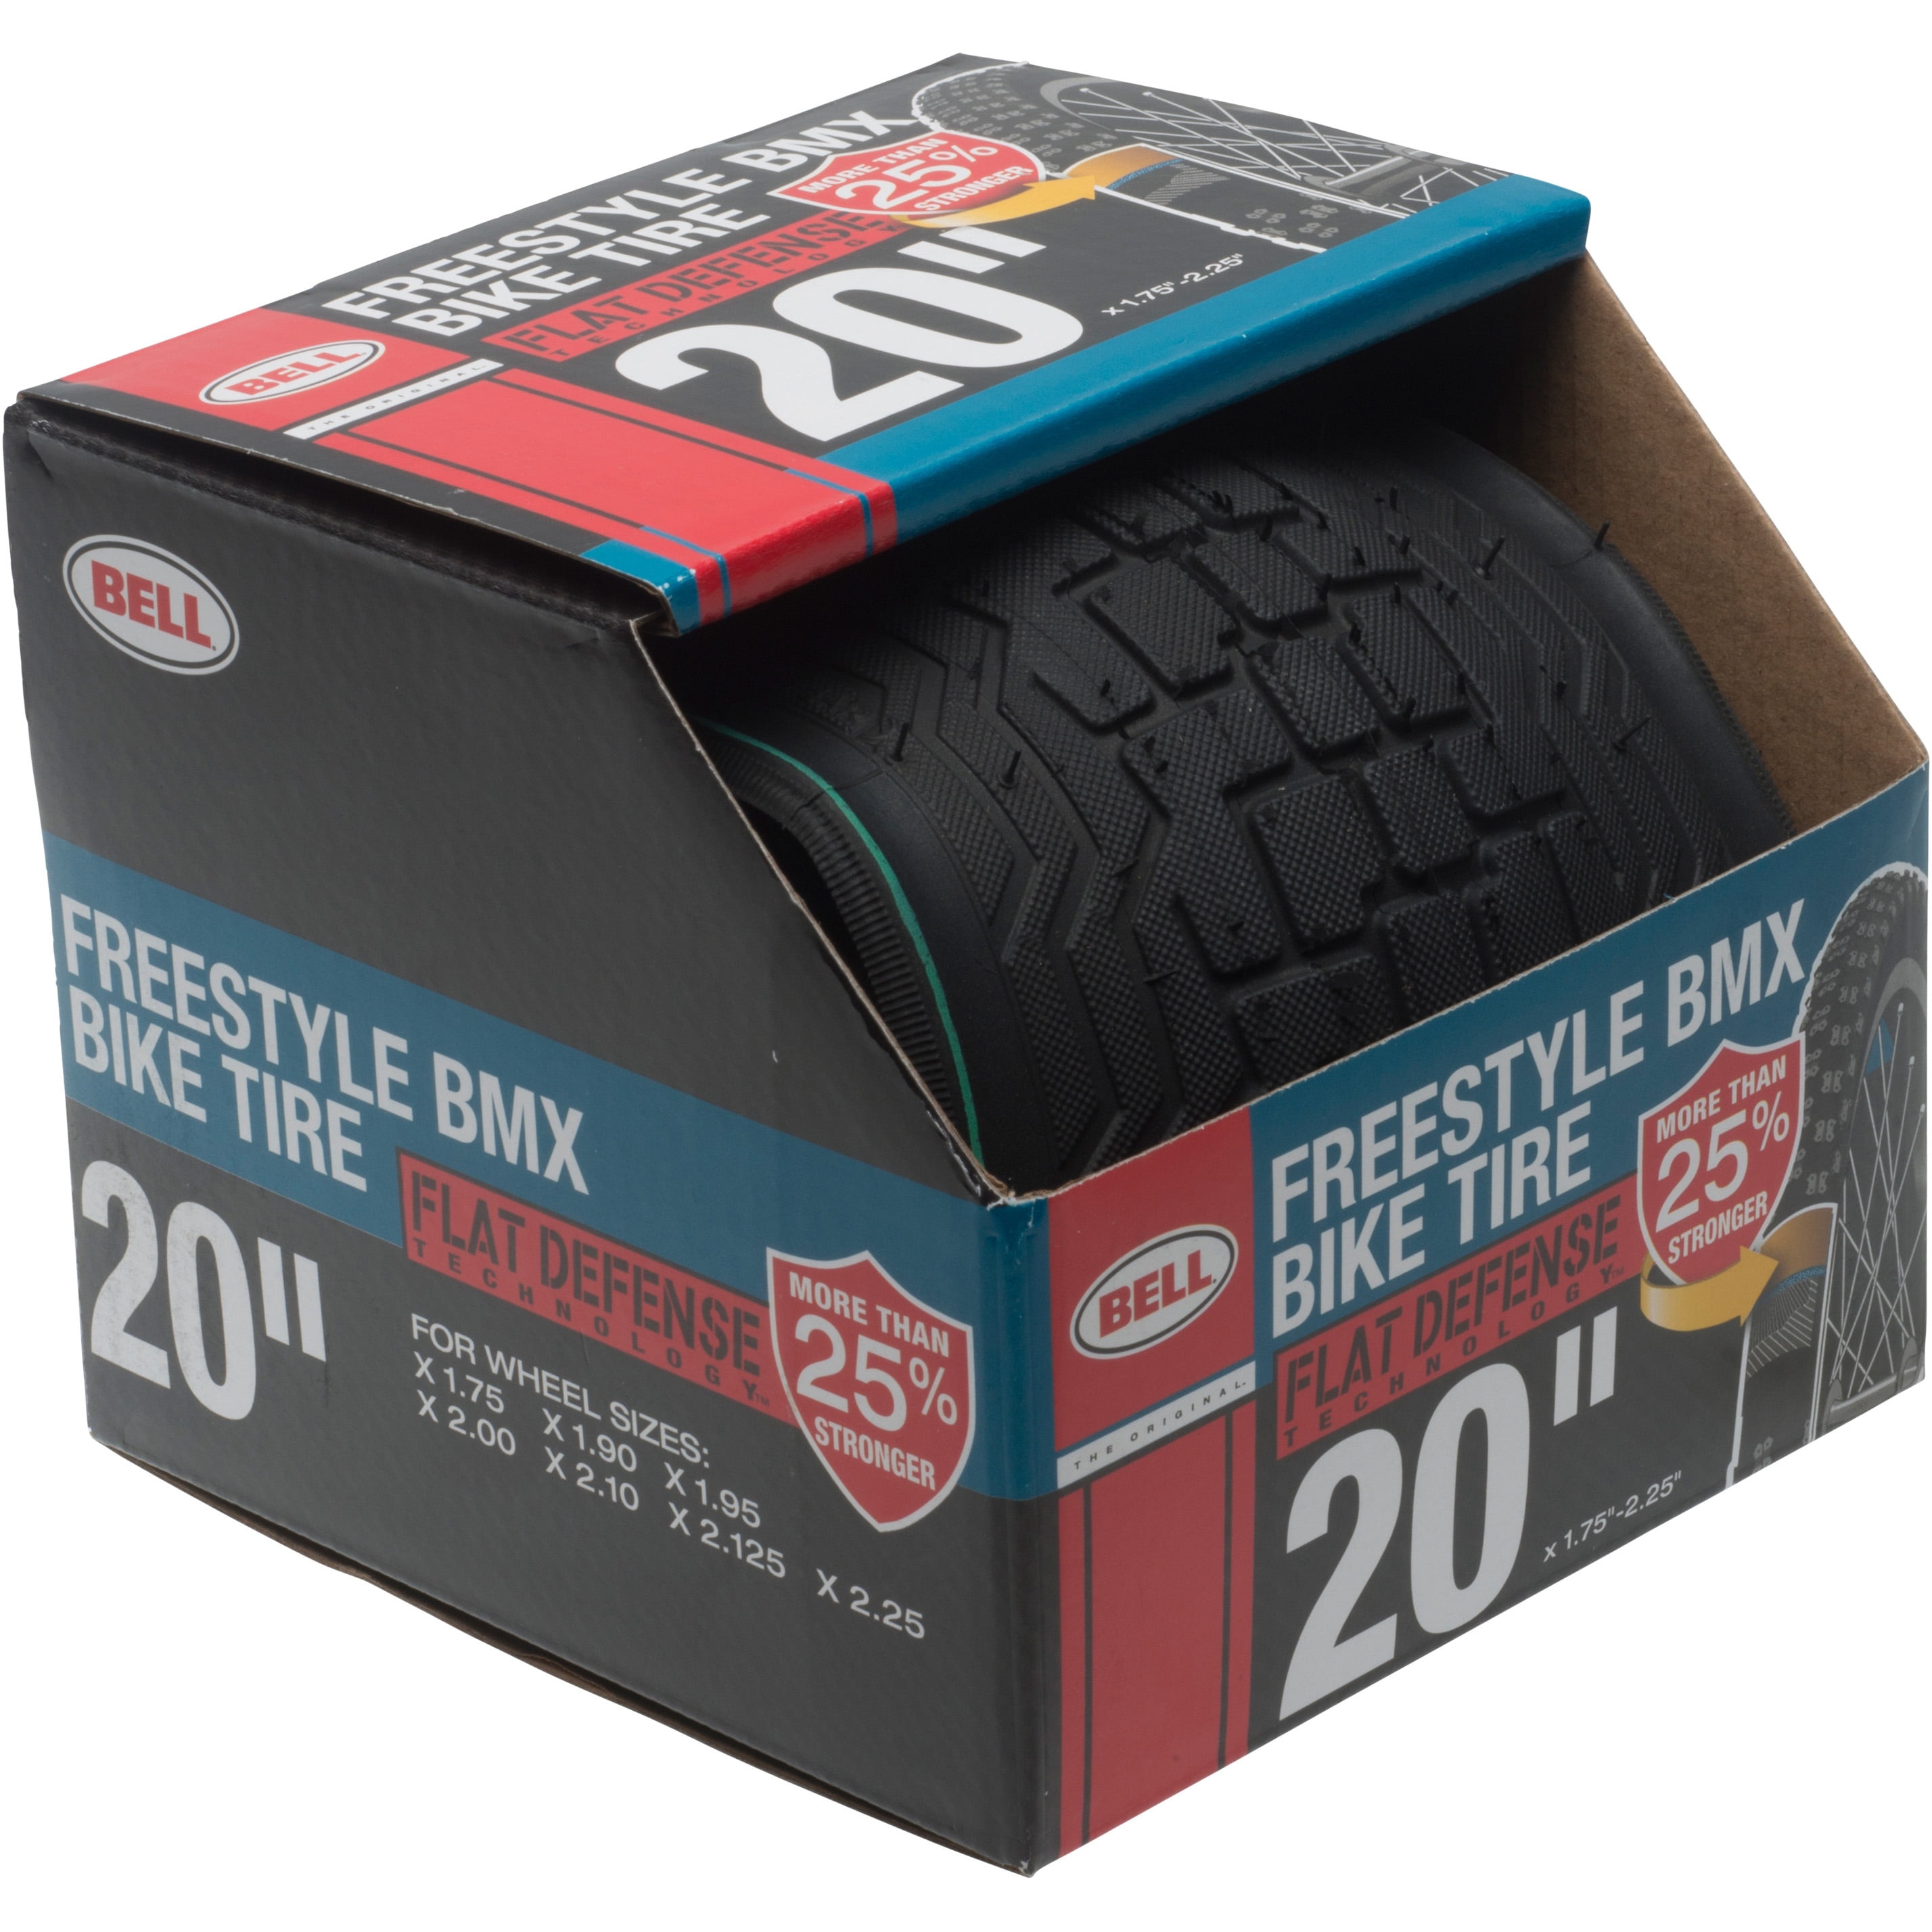 Details about   Bell Mountain Bike Tire 20”x2.10 air Guard Anti-apuncture protection 30% Strong 